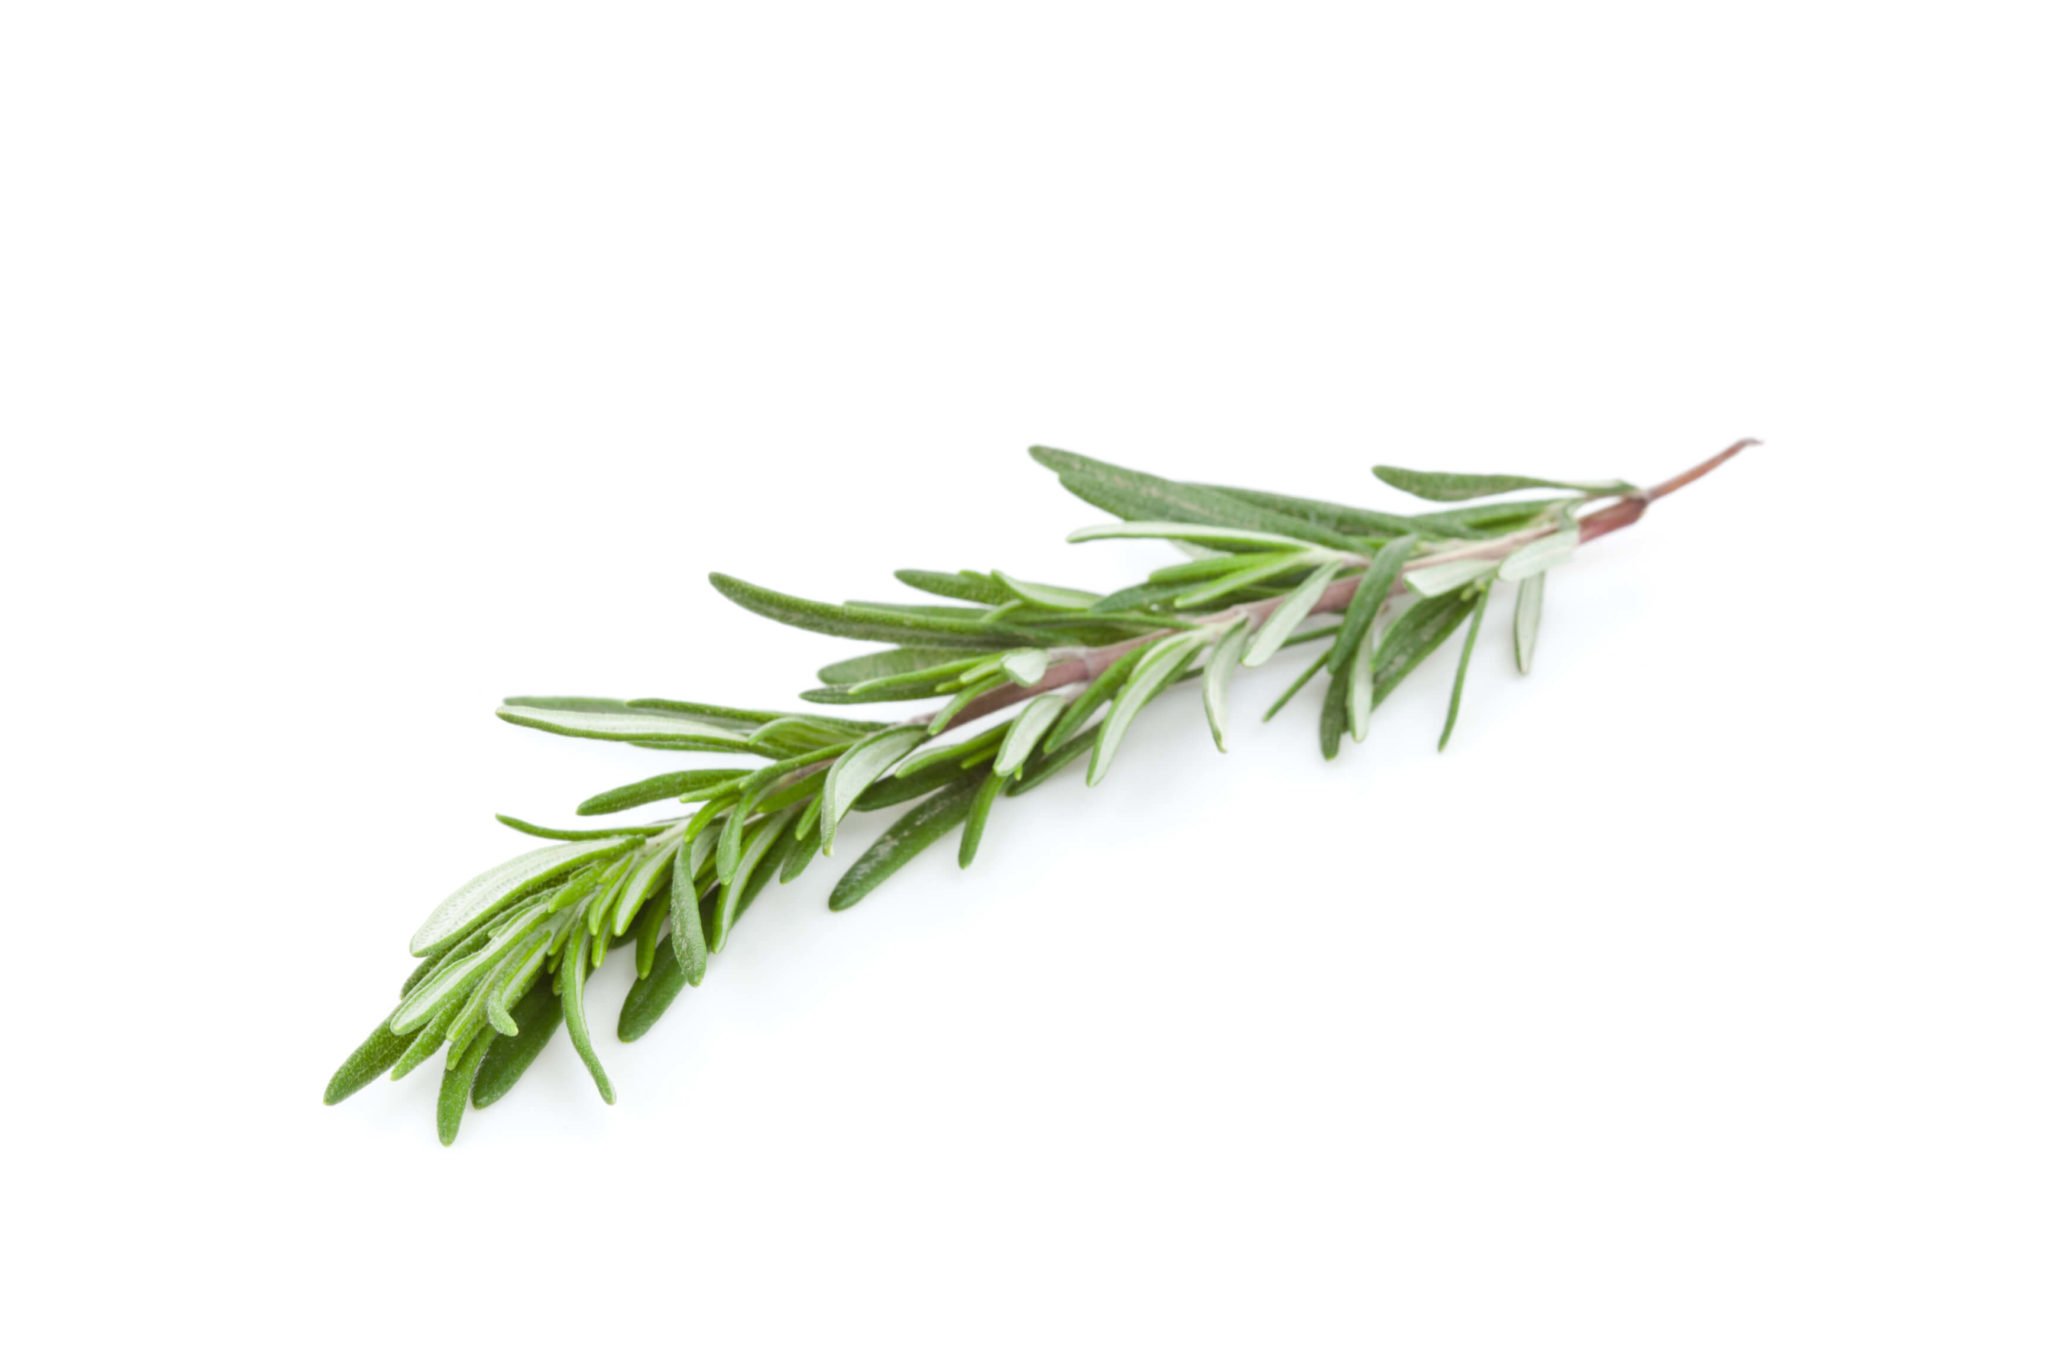 Cooking with Fresh Herbs: Tips for using rosemary